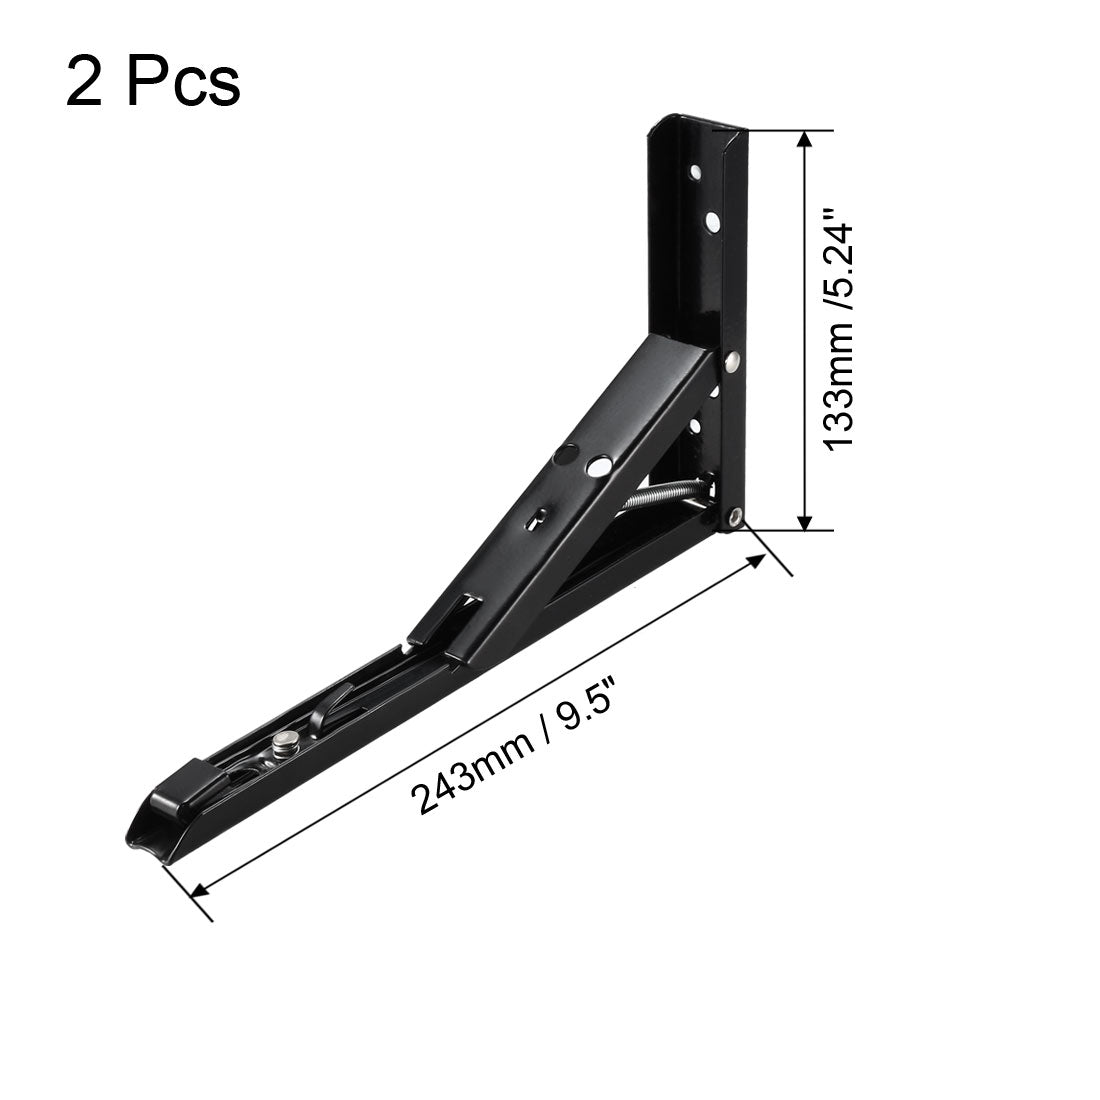 uxcell Uxcell Folding Bracket 9.5 inch 243mm for Shelves Table Desk Wall Mounted Support Collapsible Long Release Arm Space Saving Carbon Steel 2pcs